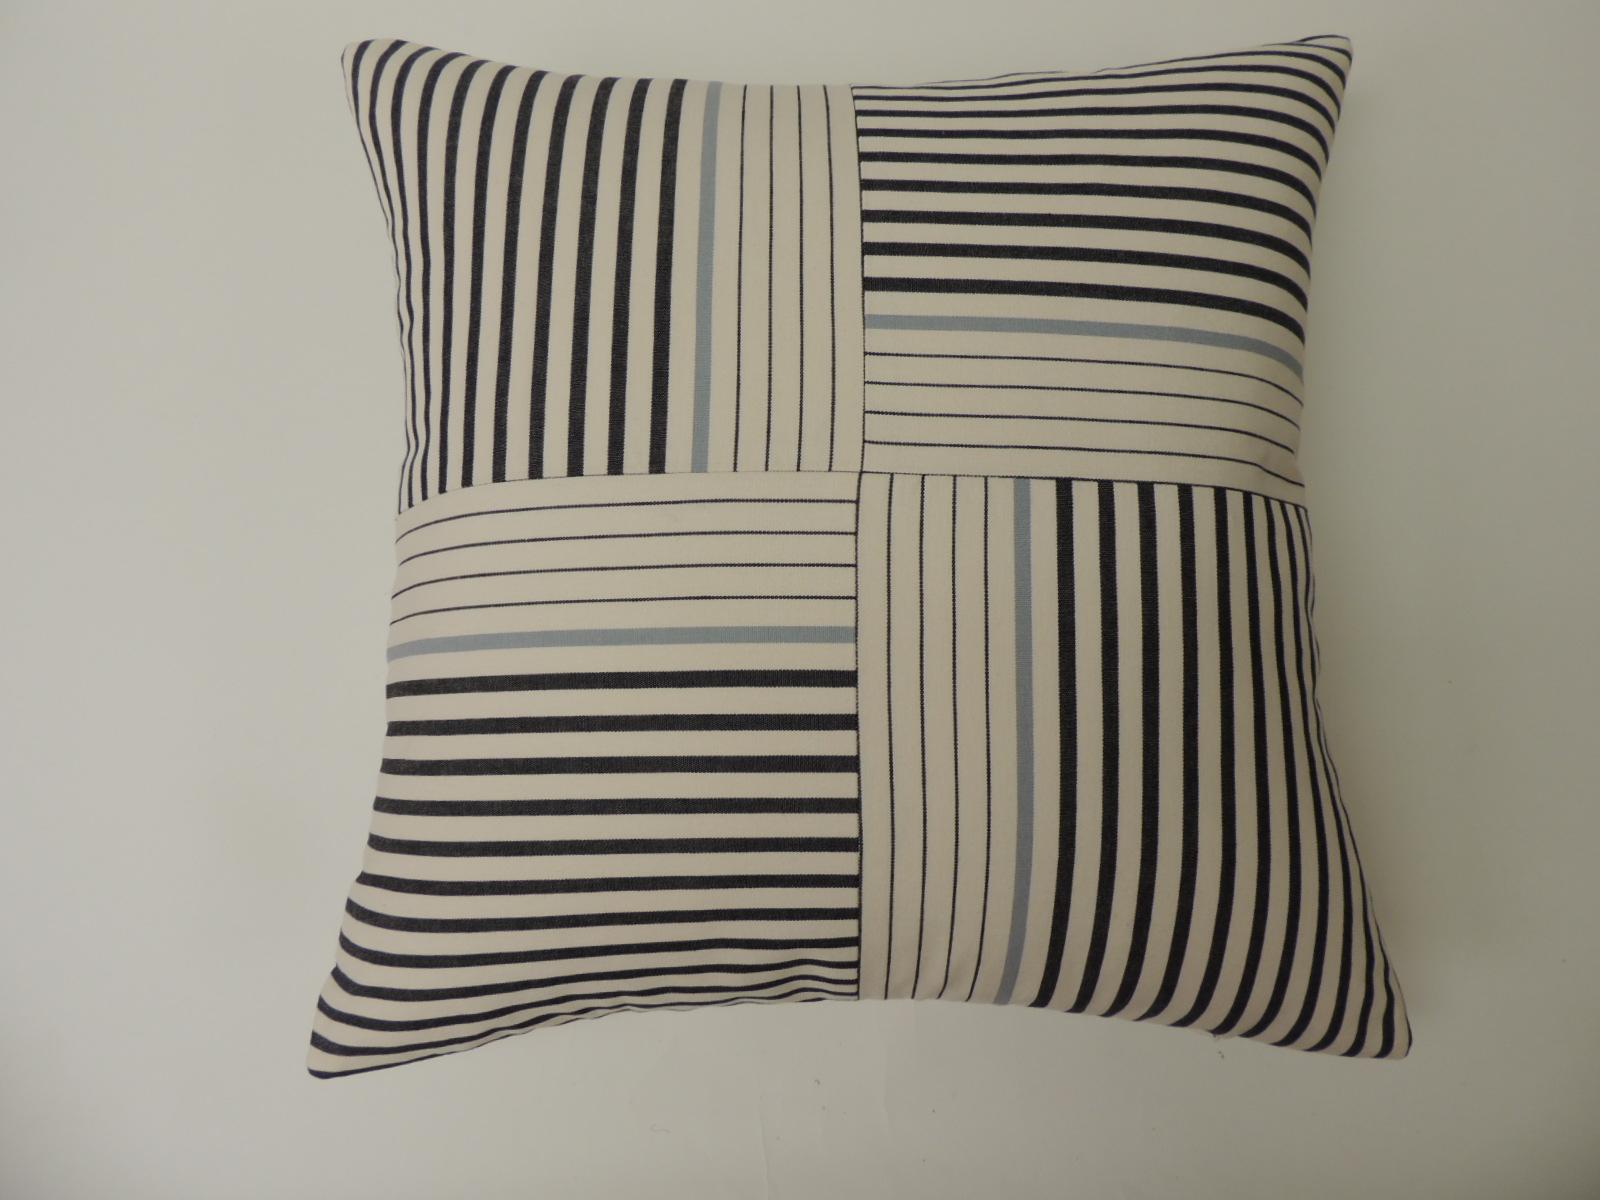 Graphic natural and charcoal grey “Parsons” stripes decorative pillow double sided #4
Parsons stripes custom ATG decorative pillow using stripes to create this modern pattern, in shades of natural, slate blue and charcoal grey.
The price on the